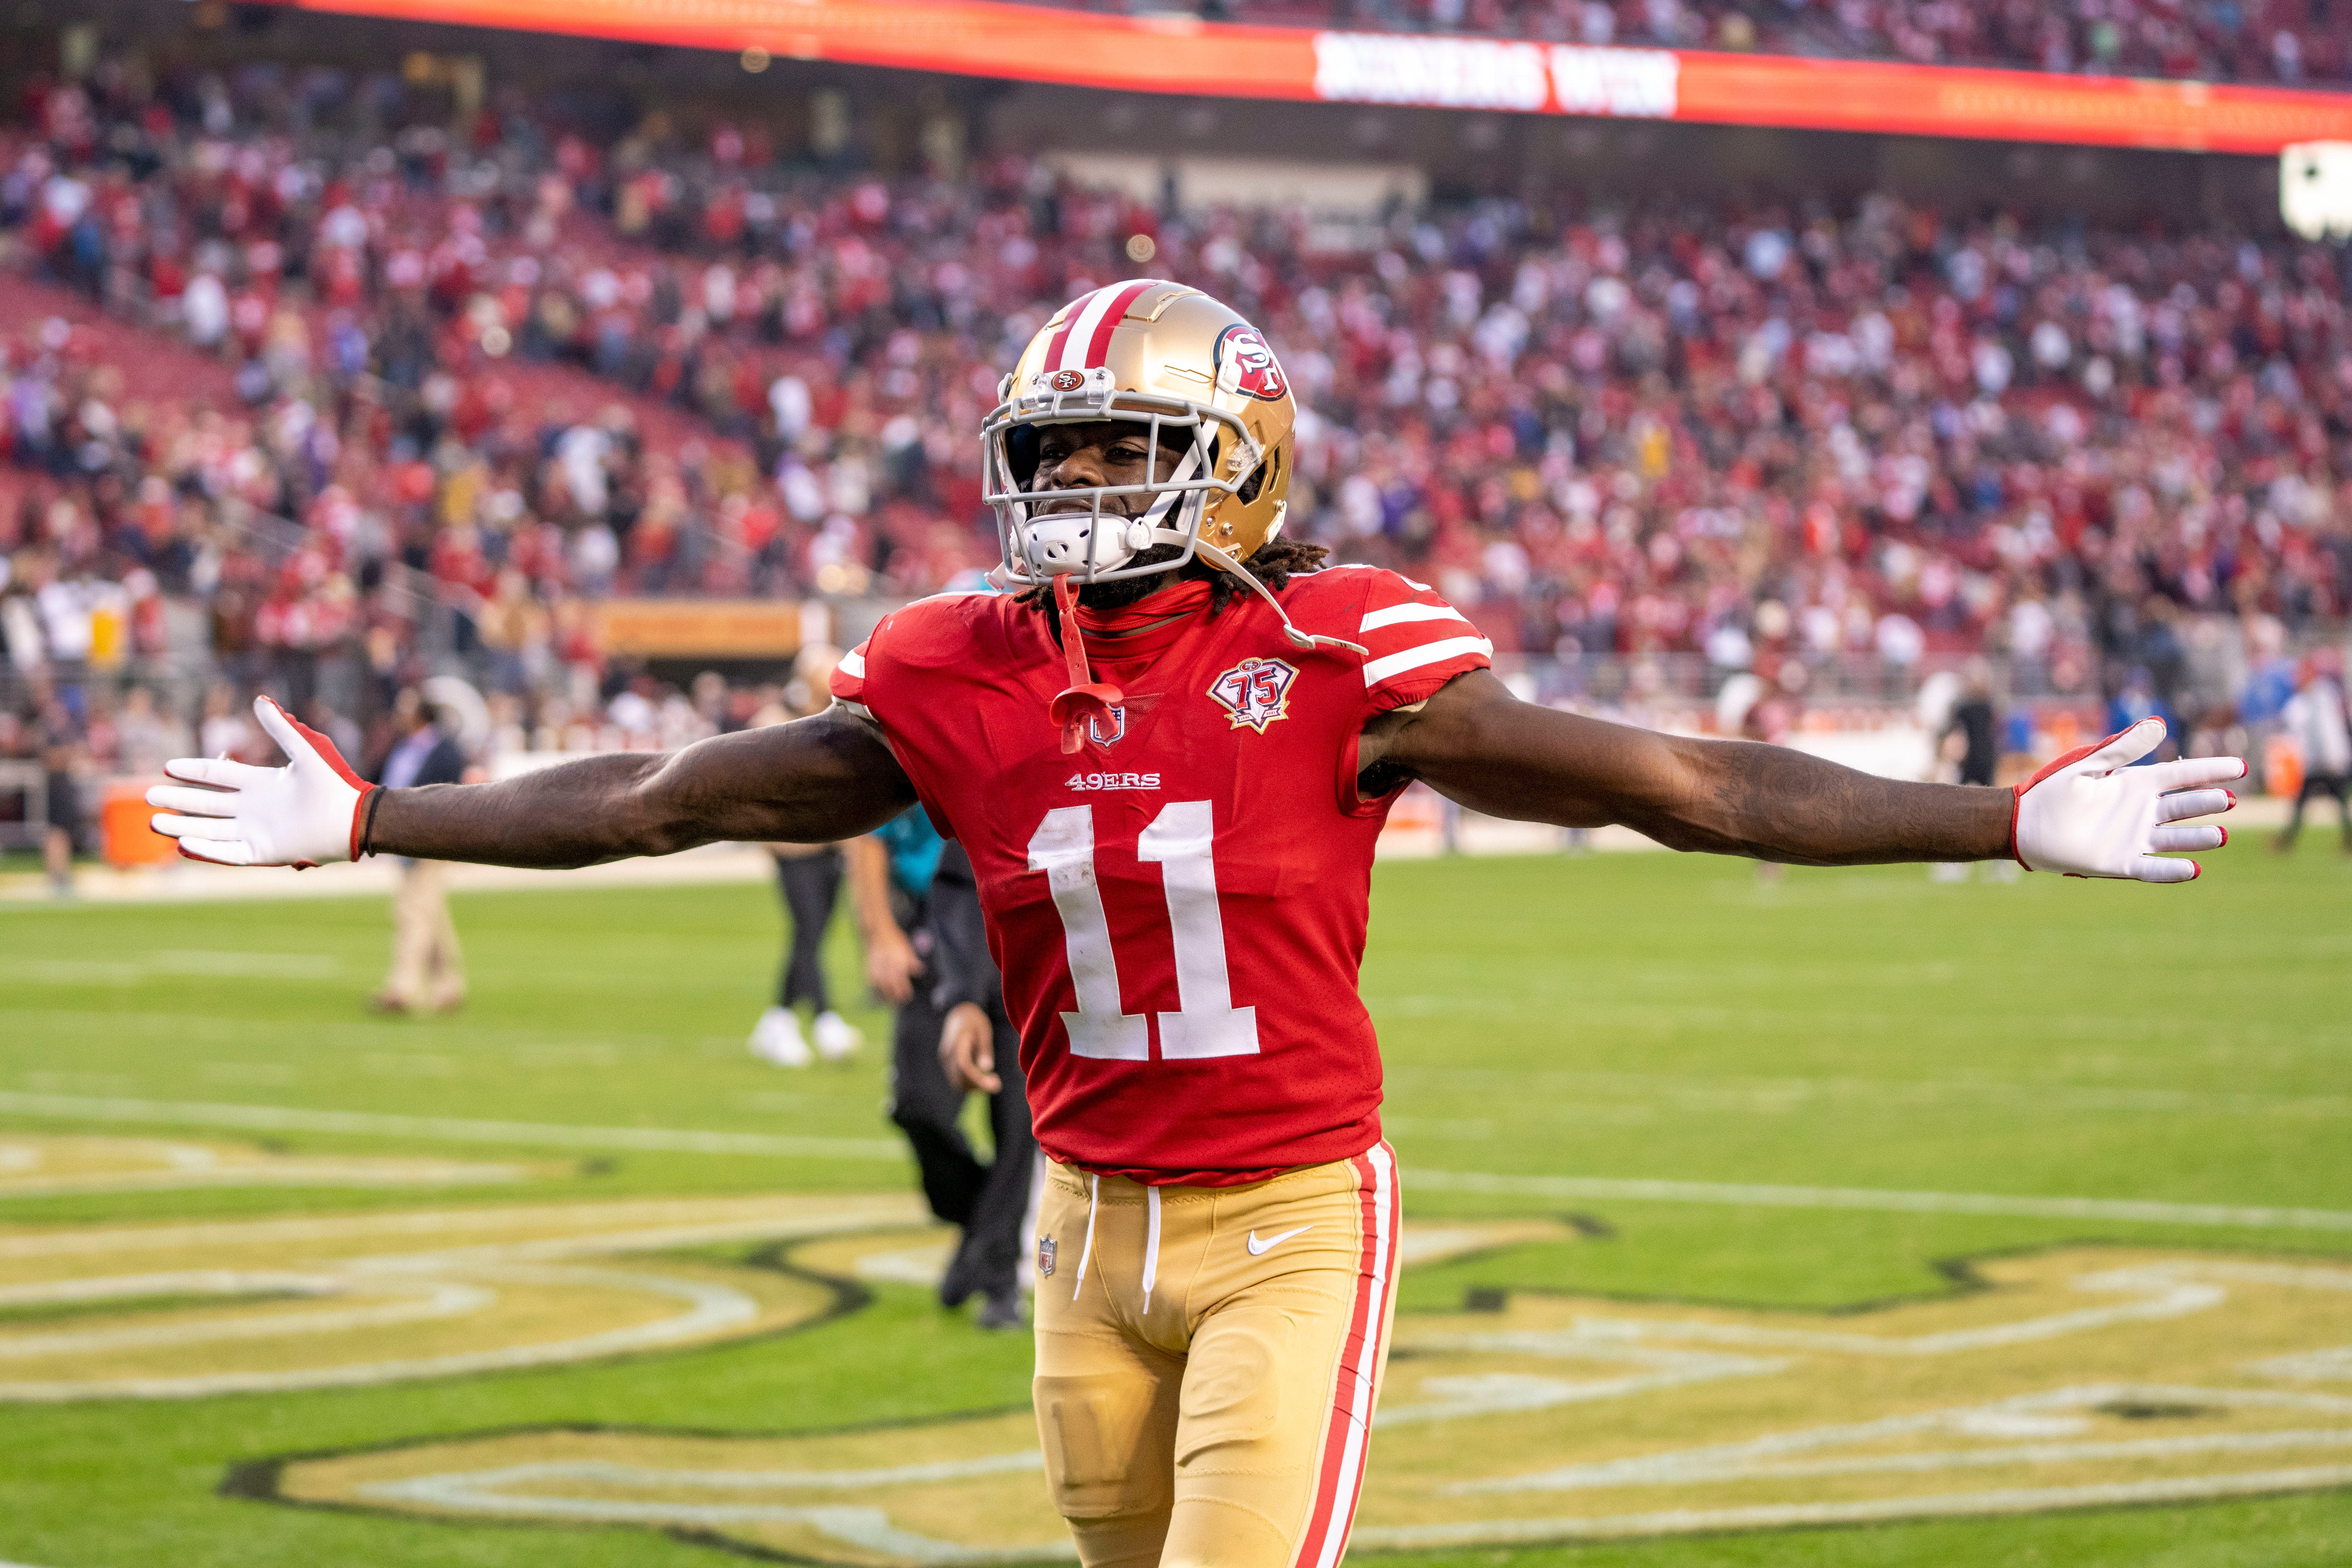 Brandon Aiyuk trade options: Which team is best landing spot for 49ers WR?